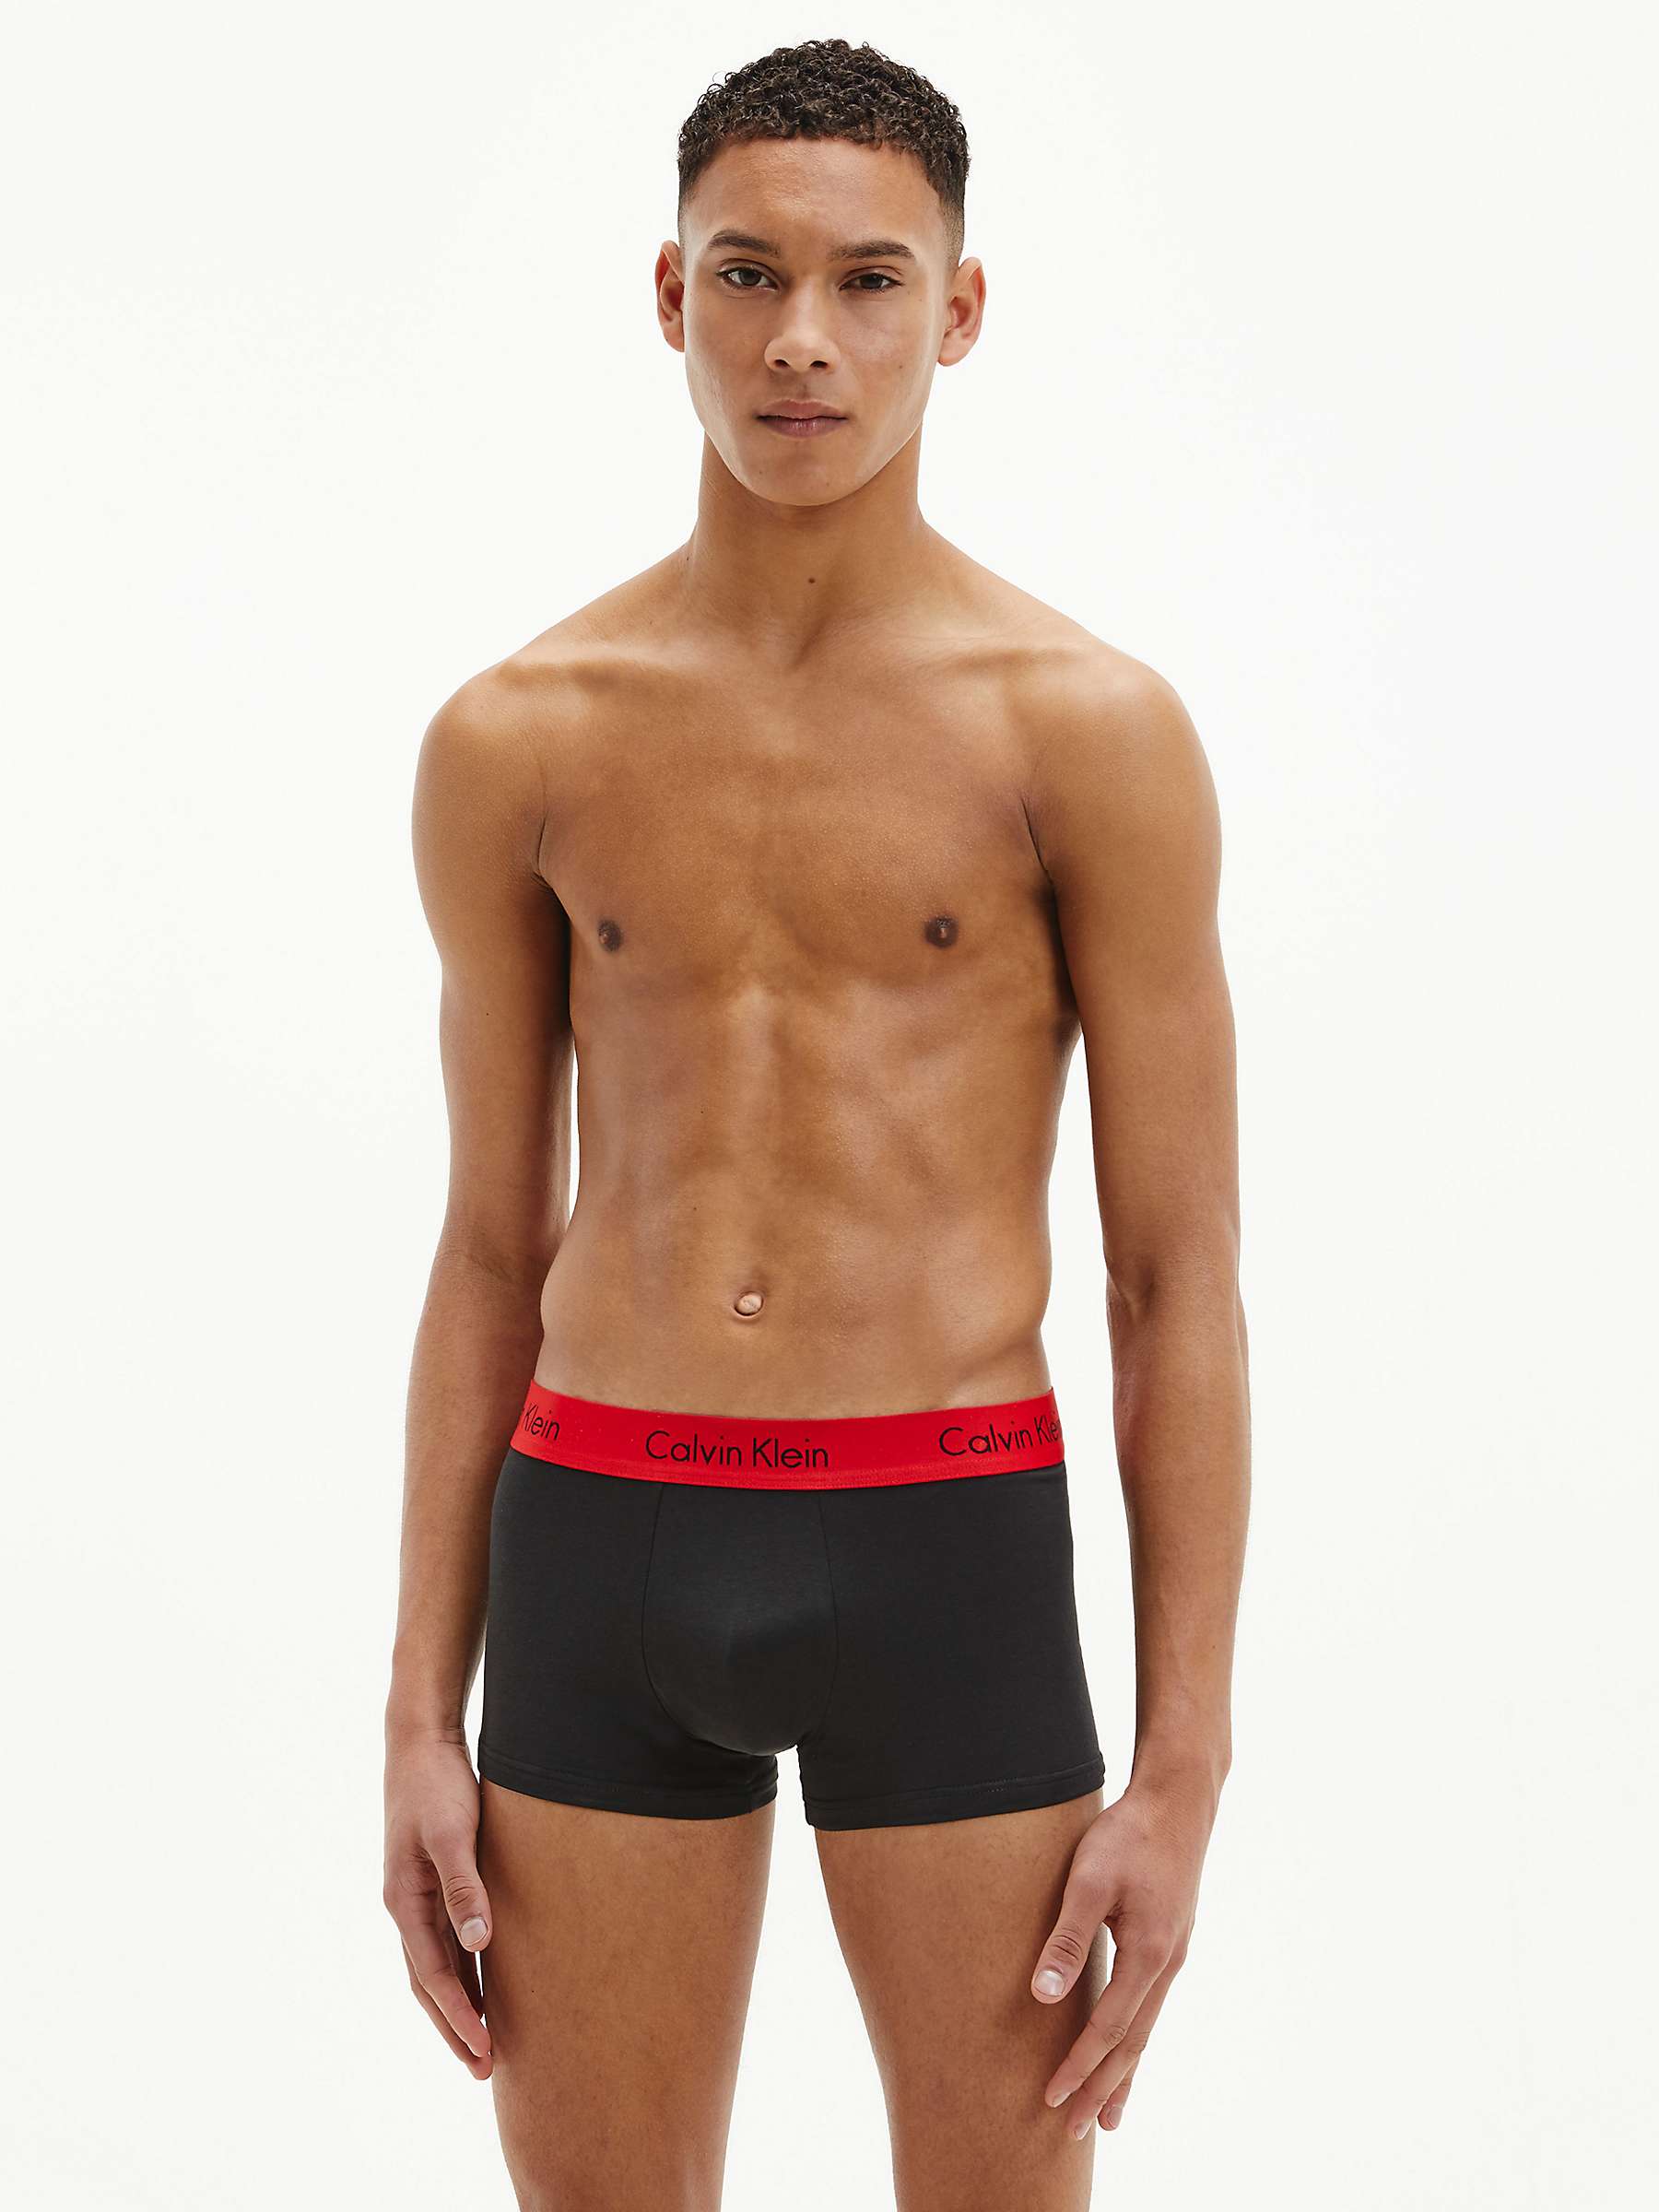 Buy Calvin Klein Cotton Stretch Trunks, Pack of 2, Black/Red Online at johnlewis.com